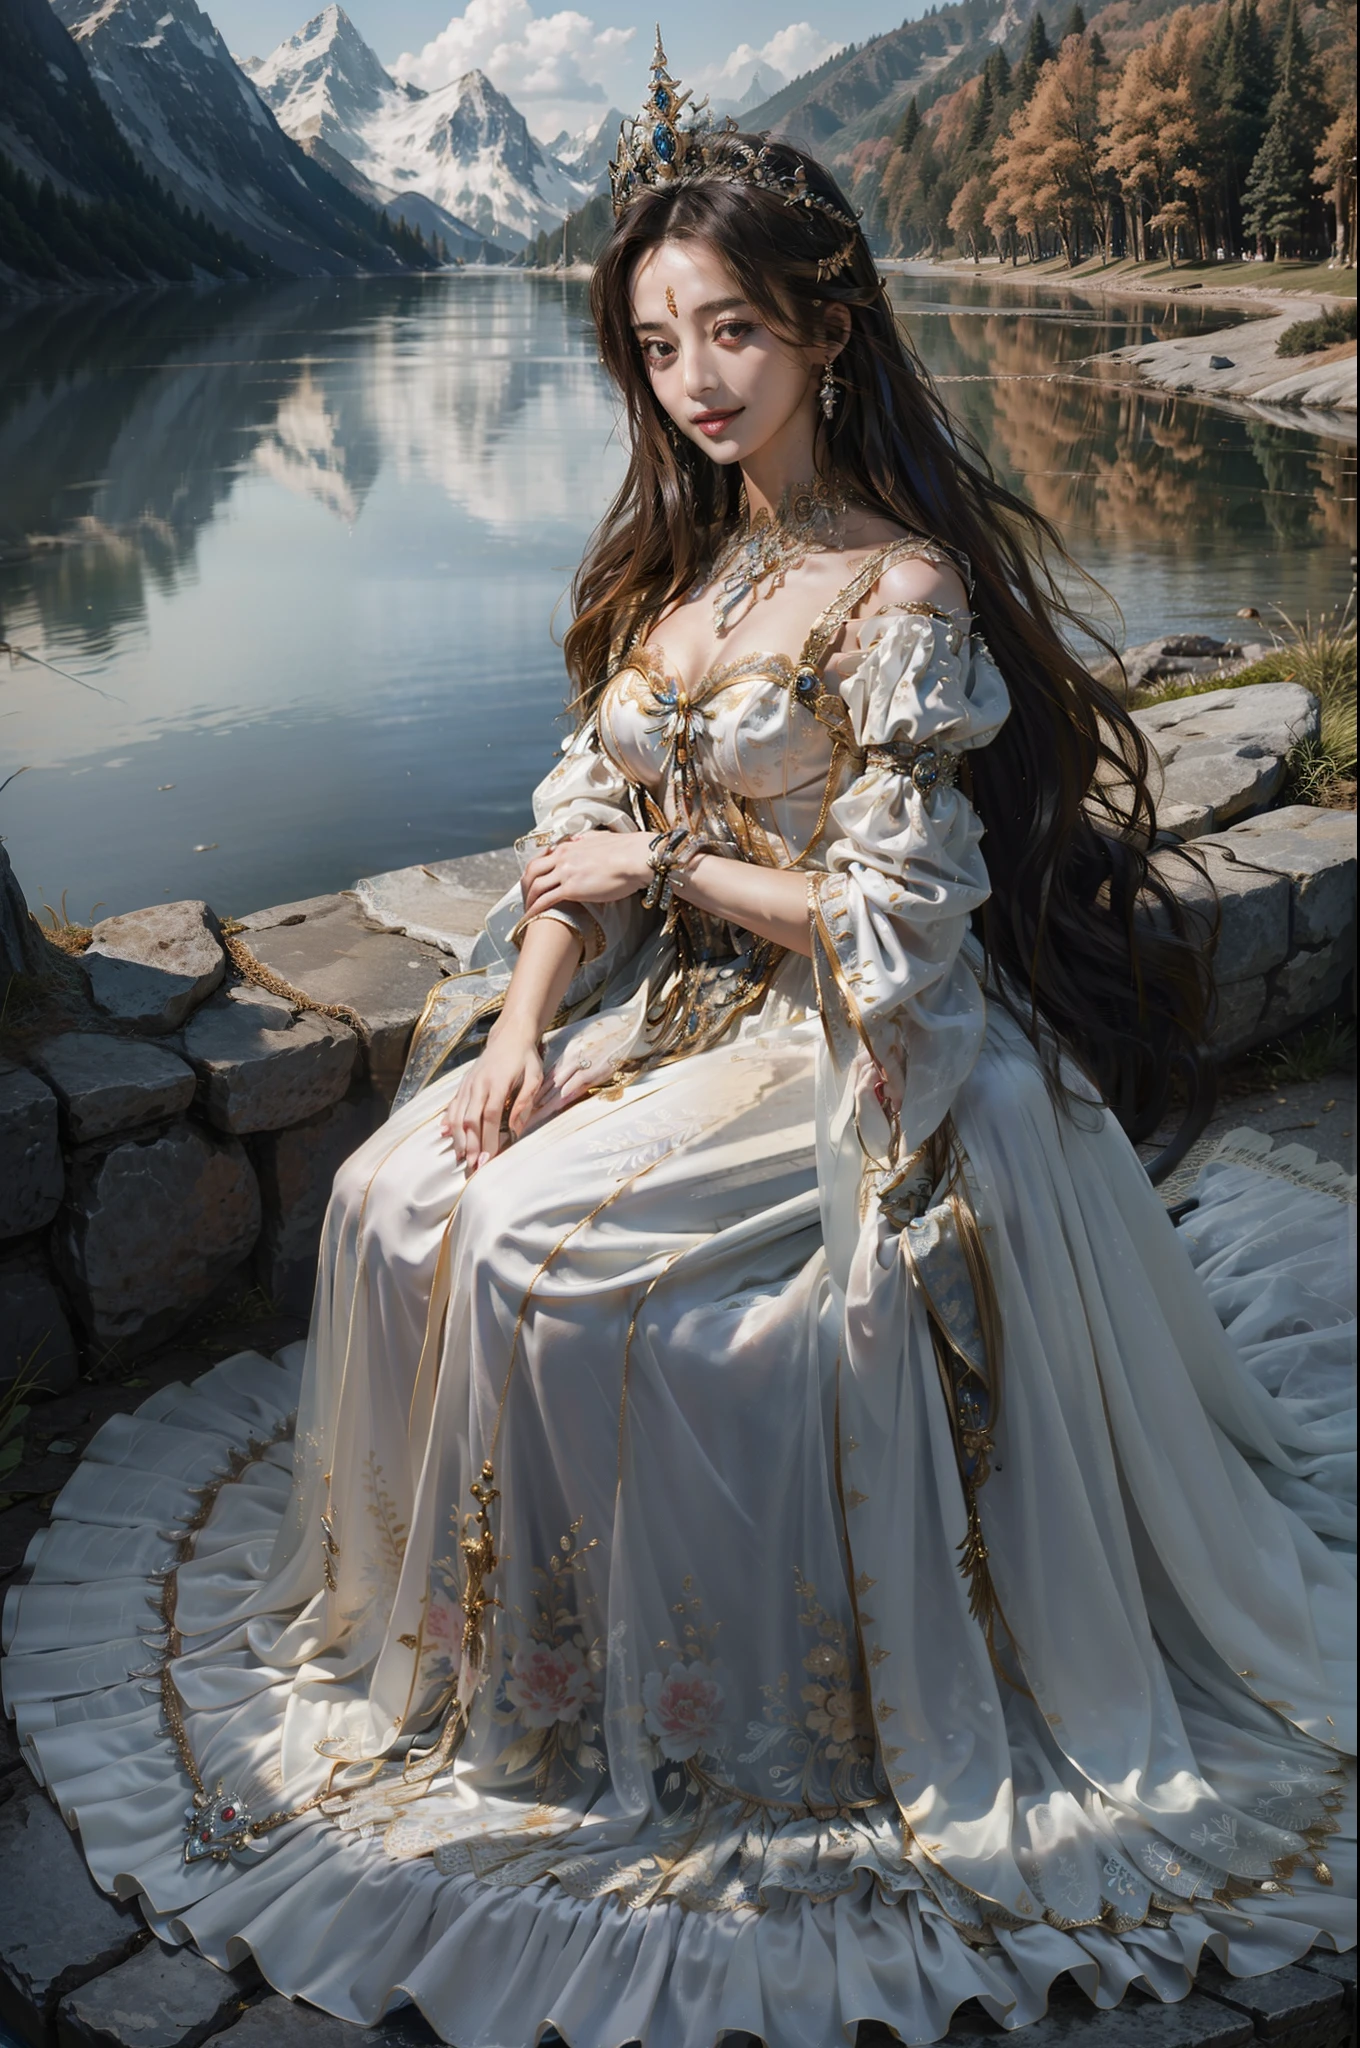 ((top-quality、​masterpiece、photographrealistic:1.4、in 8K))、Beautuful Women、18year old、beautiful expression、extremely detailed eye and face、beatiful detailed eyes、（Luxury dresses in the style of medieval Europe、Princess）、Luxury accessorieysterious lake and mountains in the background々）、Cinematic lighting、Textured skin、Super Detail、high detailing、High quality、hight resolution、Looking at Viewer、Elegant smile、Full body、europian